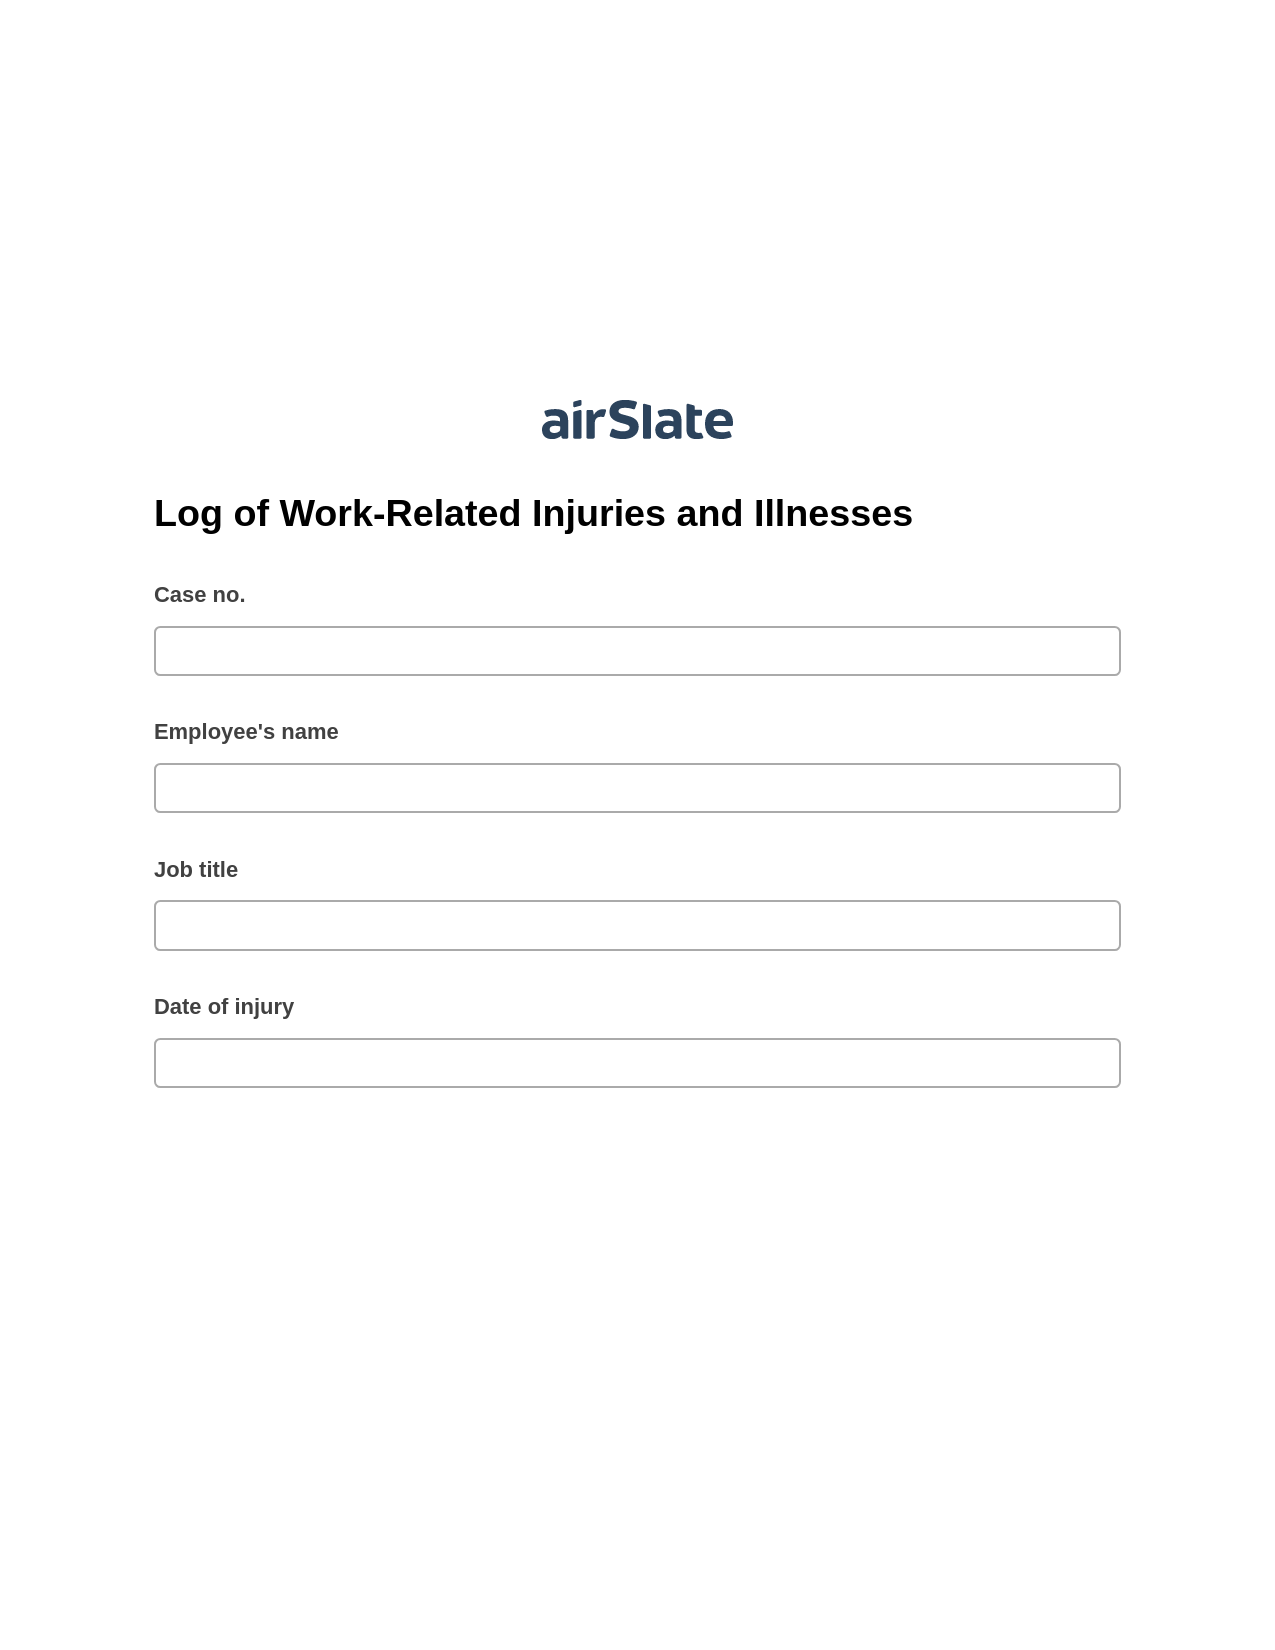 Log of Work-Related Injuries and Illnesses Pre-fill from CSV File Dropdown Options Bot, Update NetSuite Records Bot, Text Message Notification Postfinish Bot